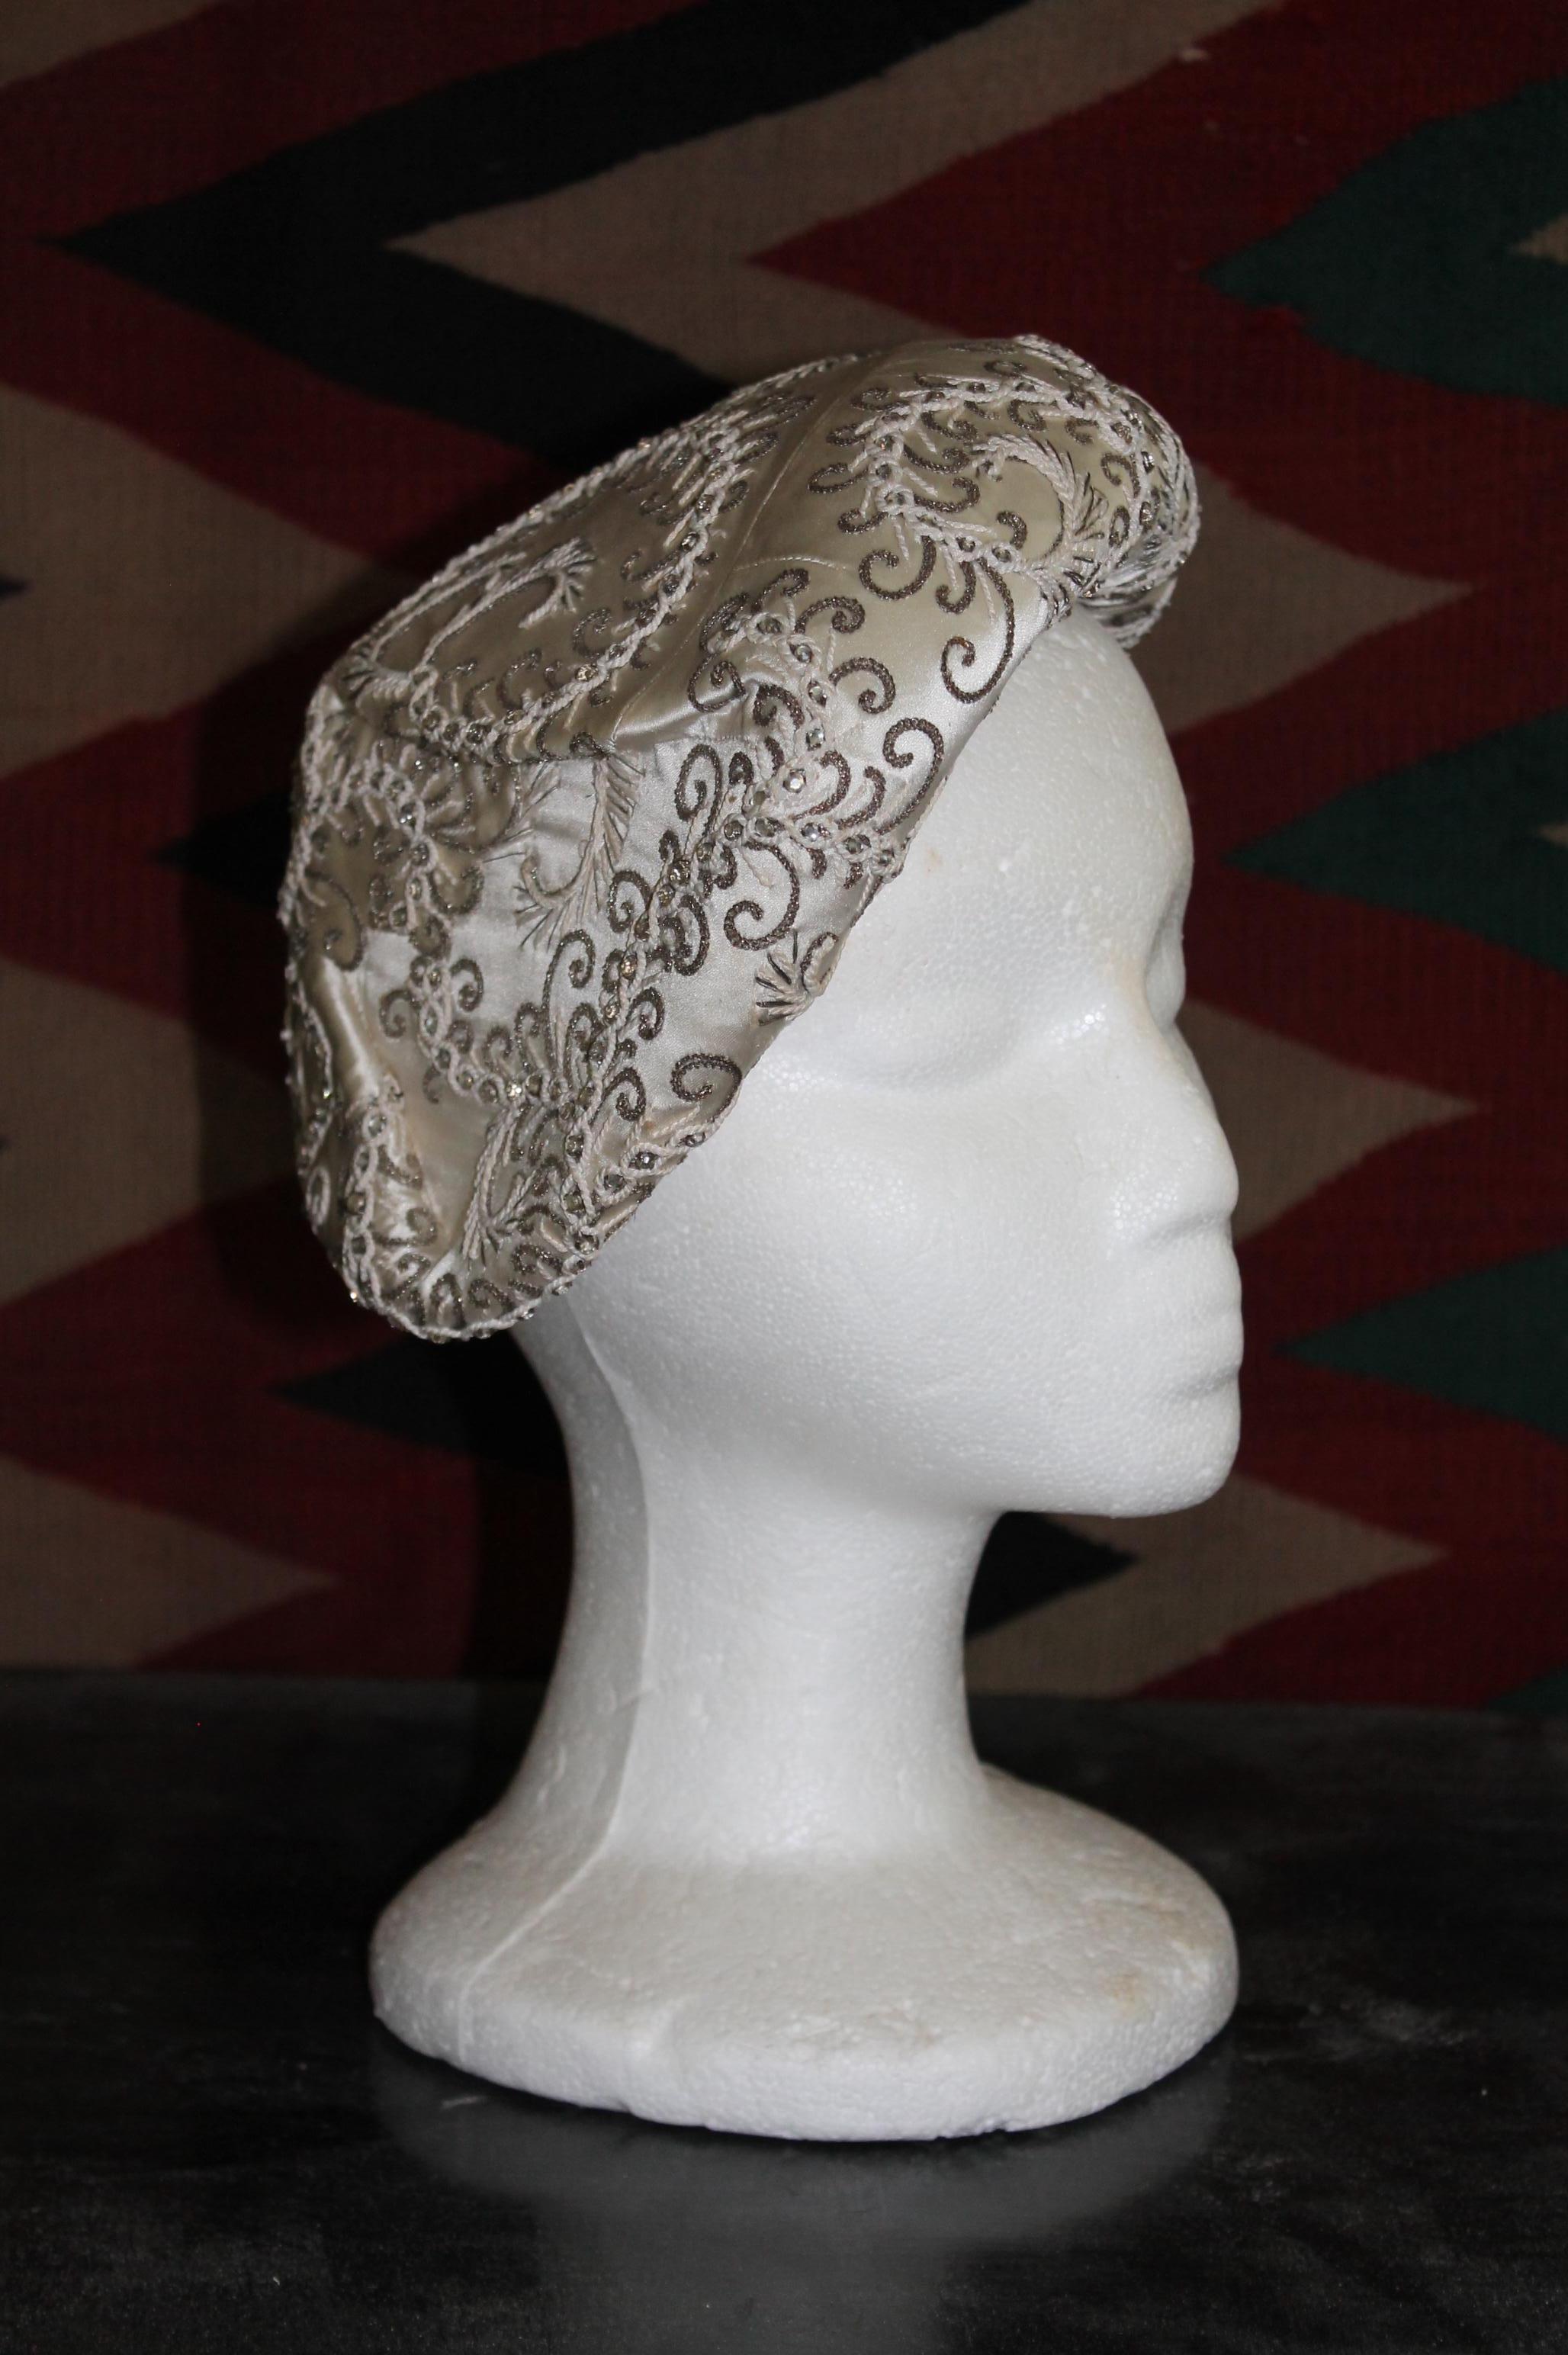 Abstract swirls of crystal and metallic threads, hand sewn and embroidered  on an ivory satin beret style hat.  LeGroux Soeurs, hat makers from the Belle Epoque through the 1950's.  Their salon (est. 1913)
was located across the street from Chanel. 